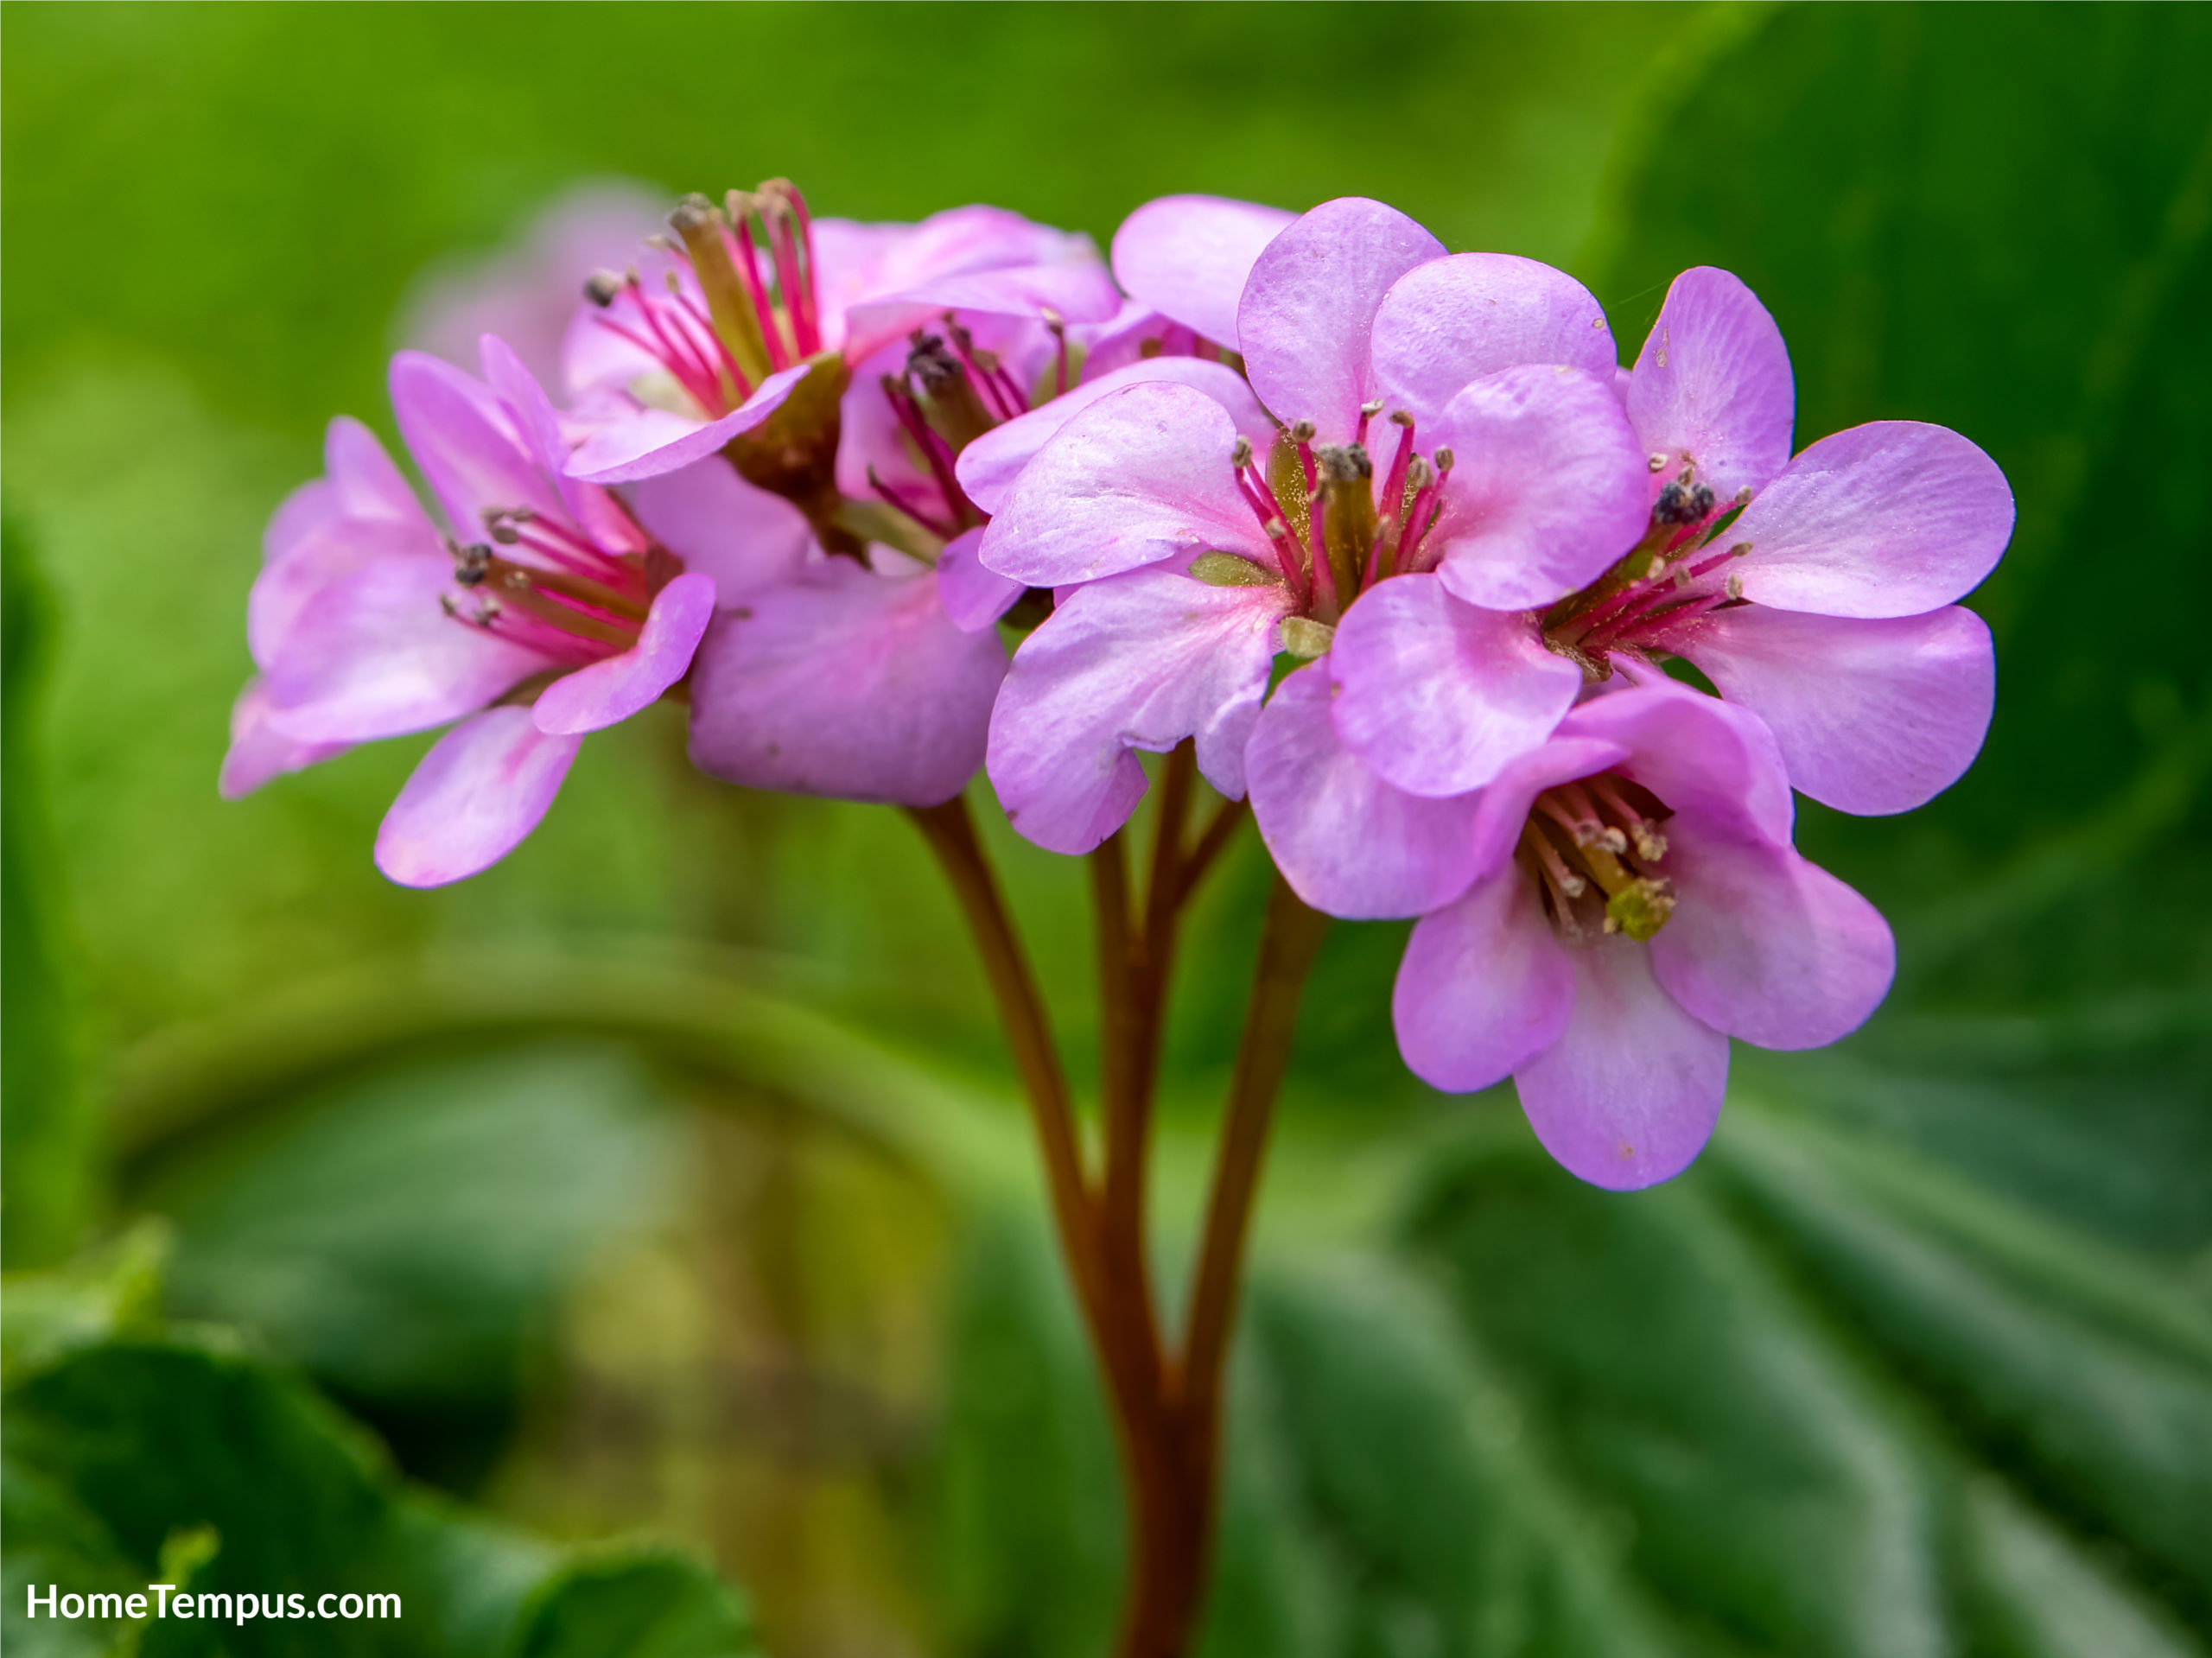 Pigsqueak or heart-leaved bergenia - flowers that start with P.